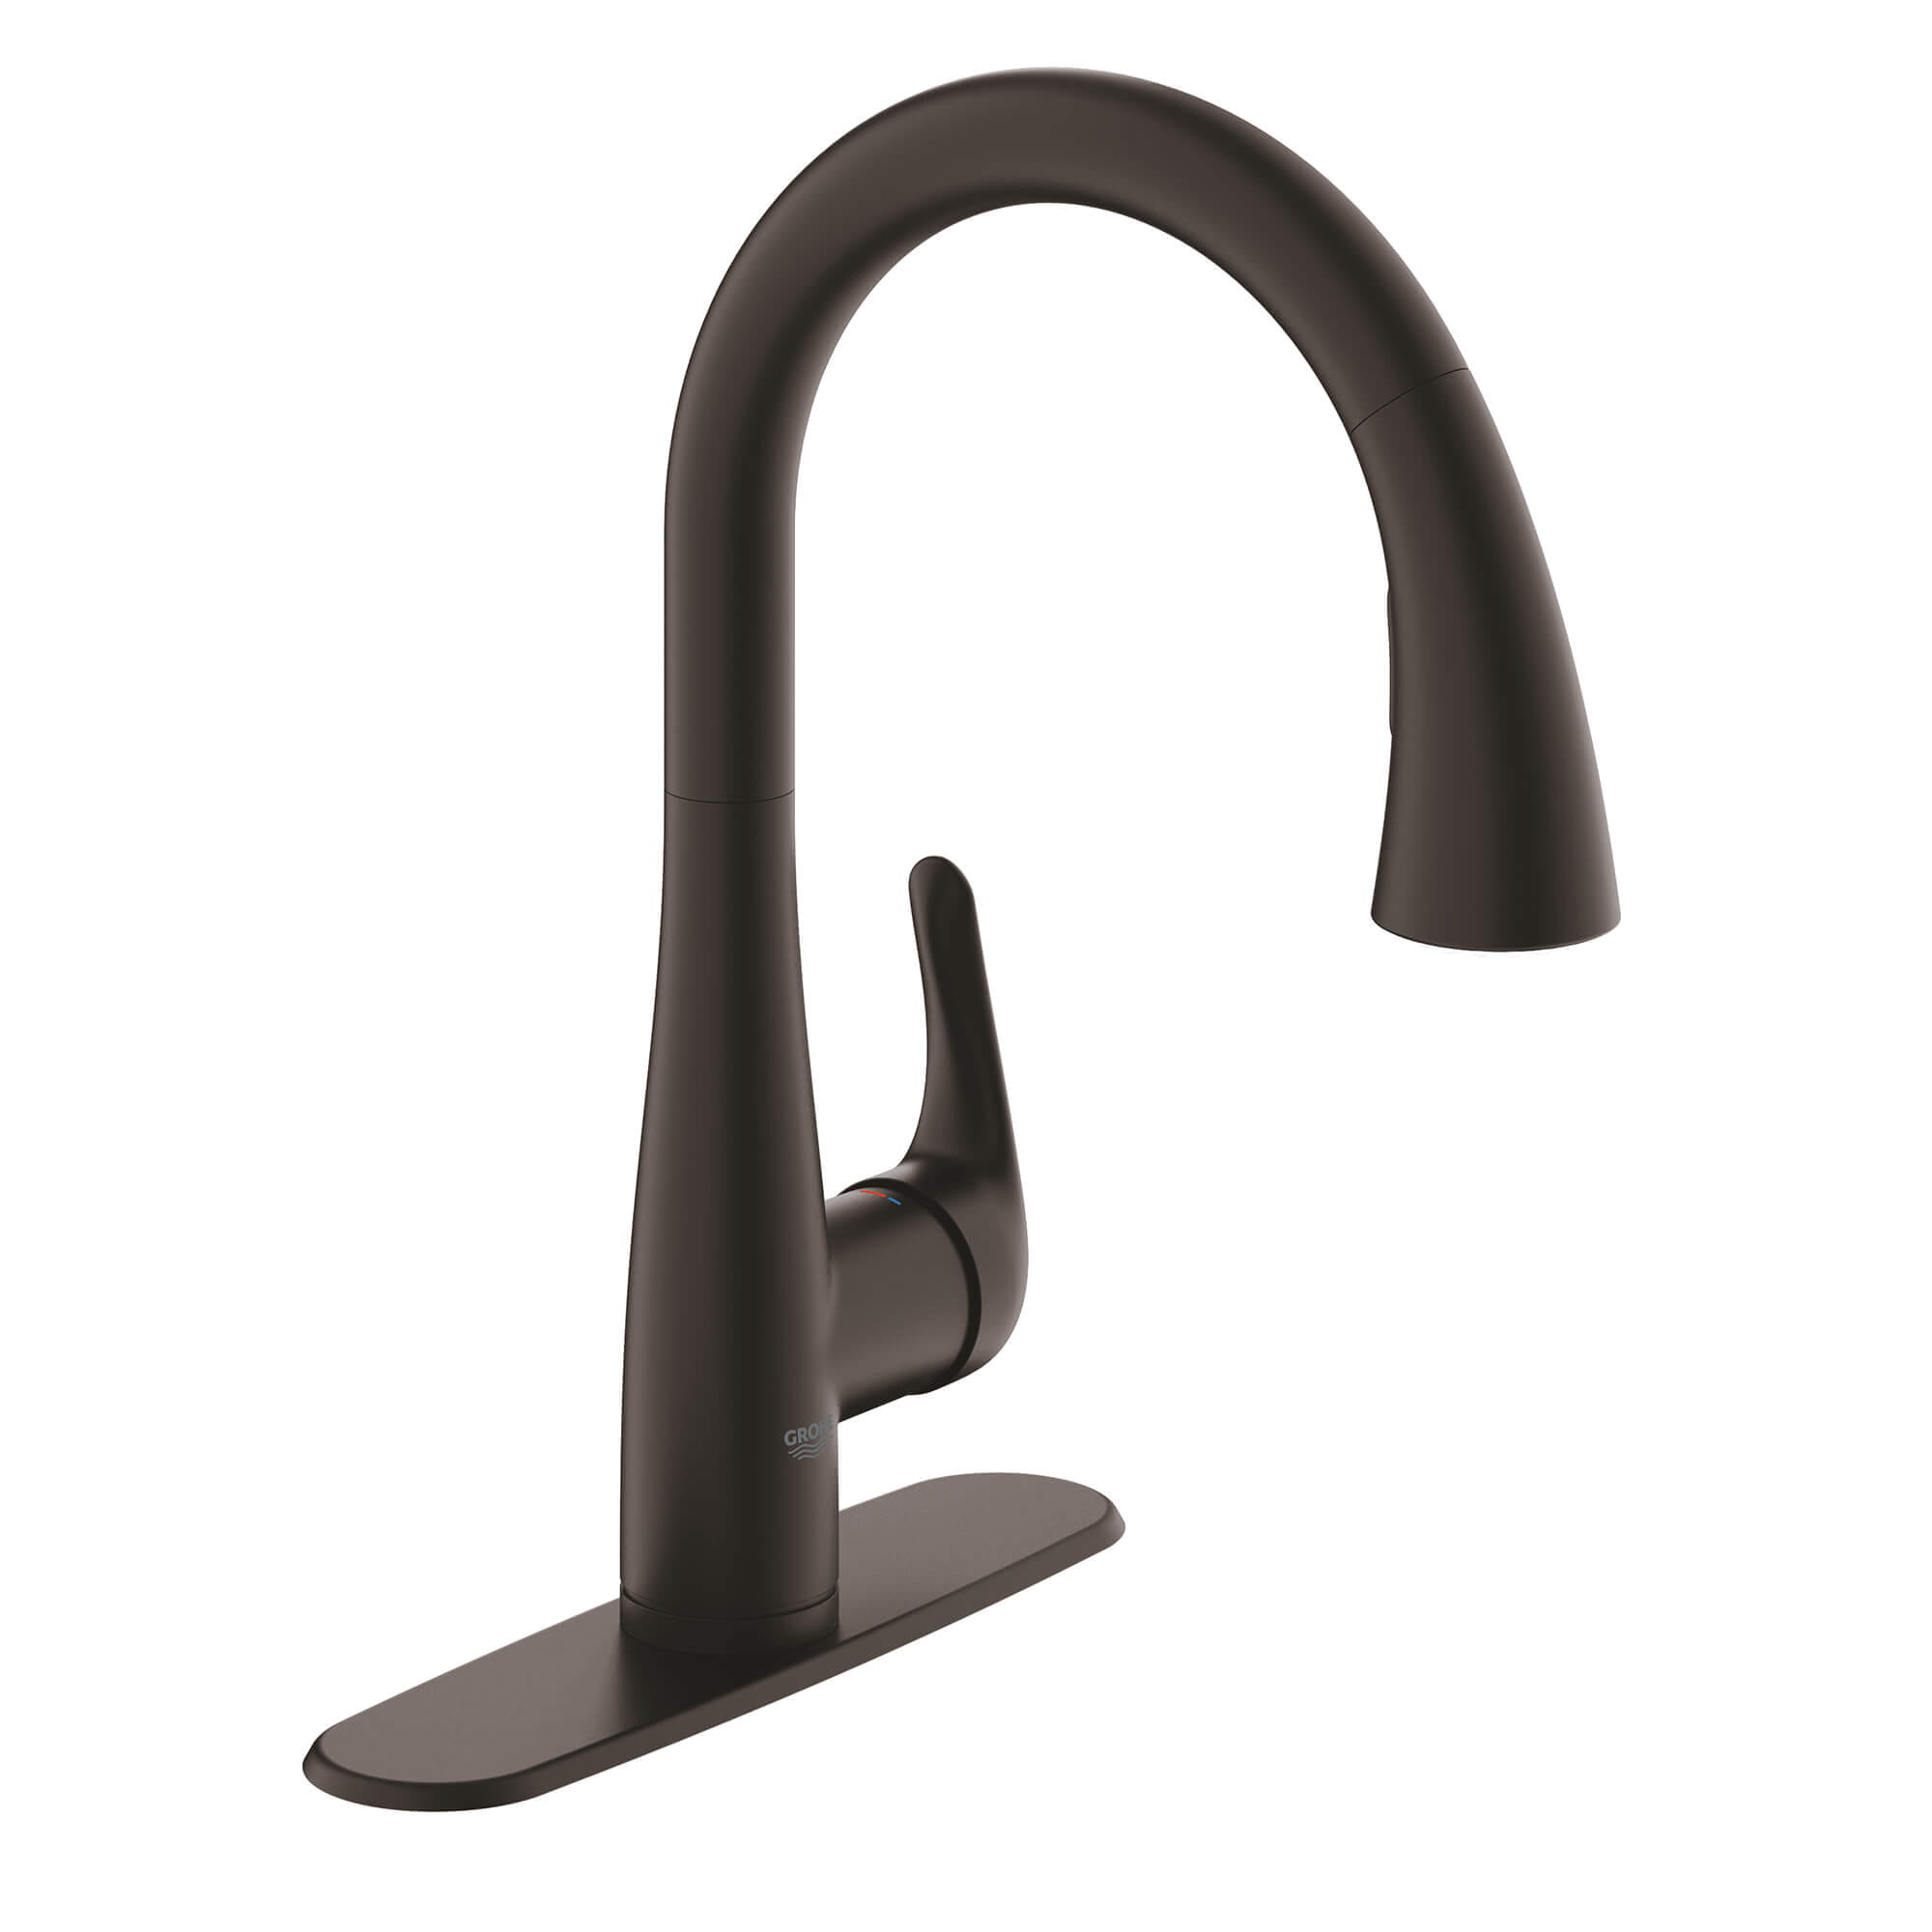 Single Handle Pull Down Kitchen Faucet Dual Spray 175 GPM GROHE ANTIQUE BRONZE